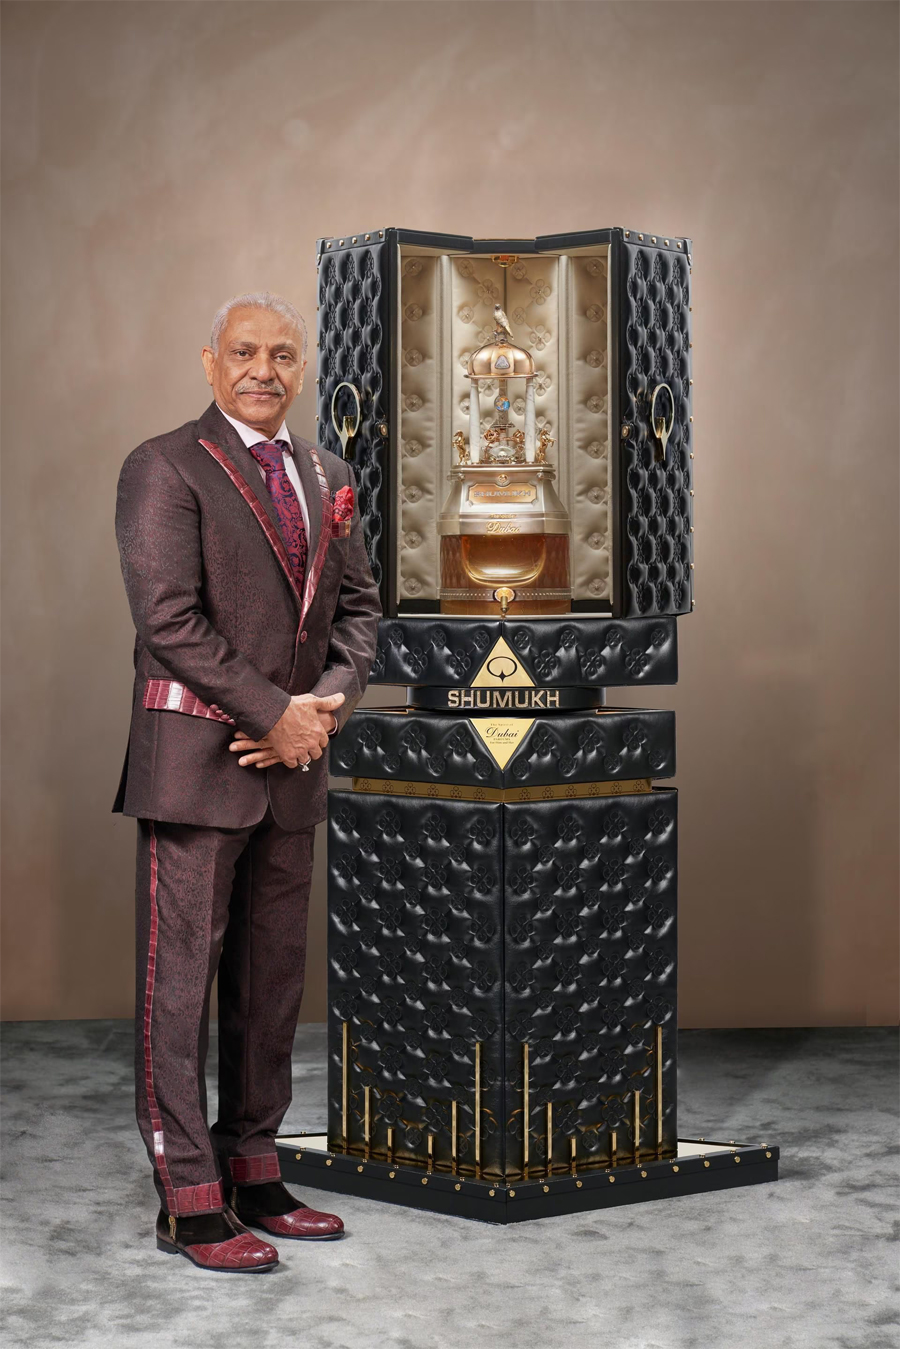 The Most Expensive Perfume in the World - Shumukh by Nabeel - $1.3 million